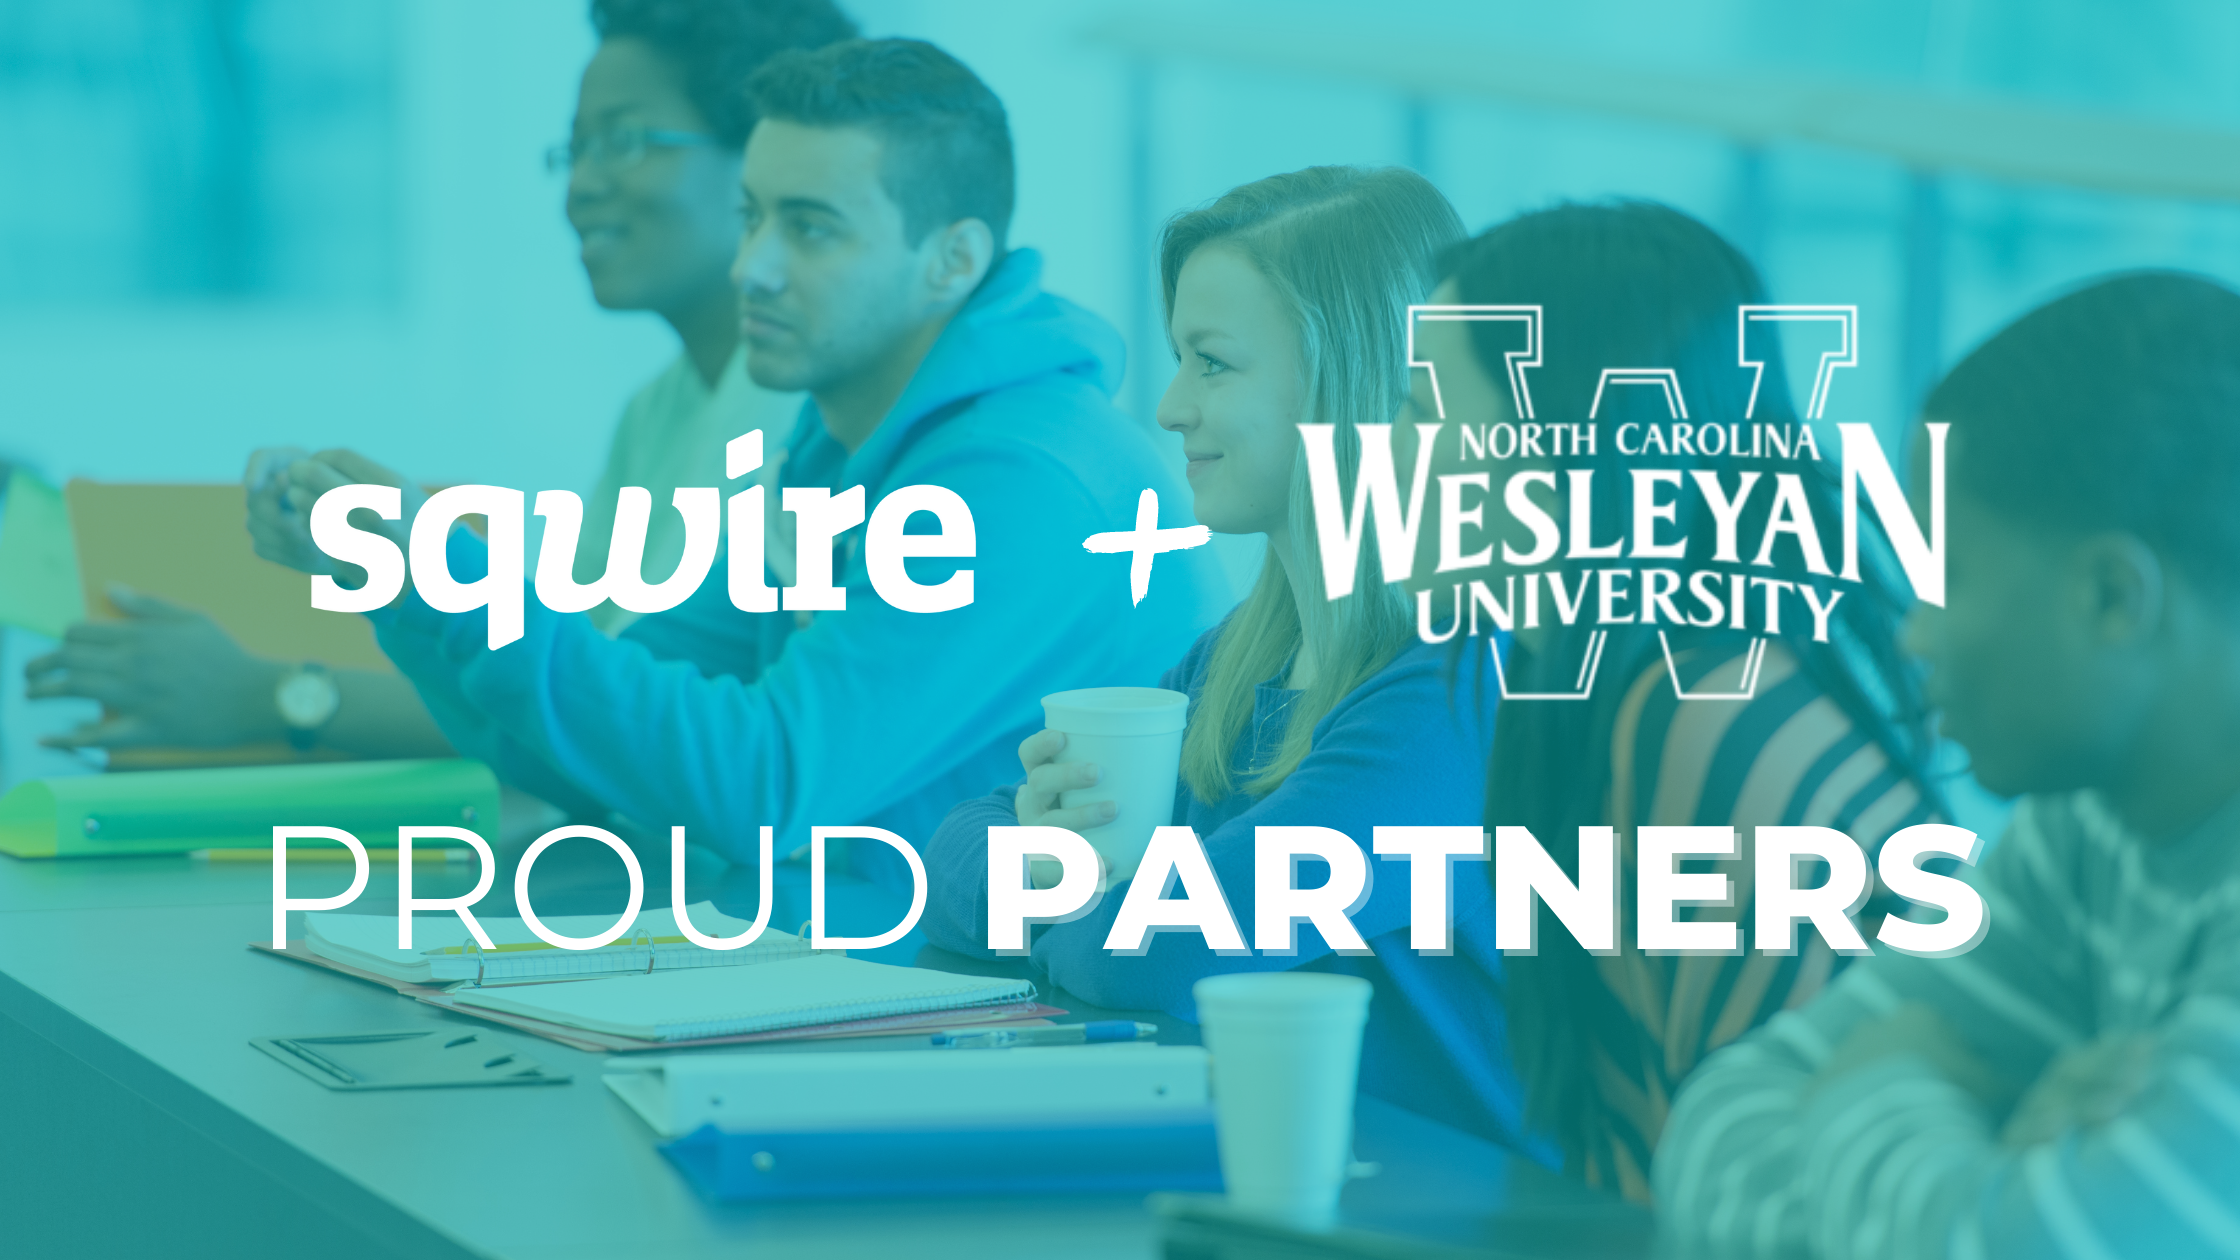 Sqwire Partners with North Carolina Wesleyan University to Provide Financial Education to Students